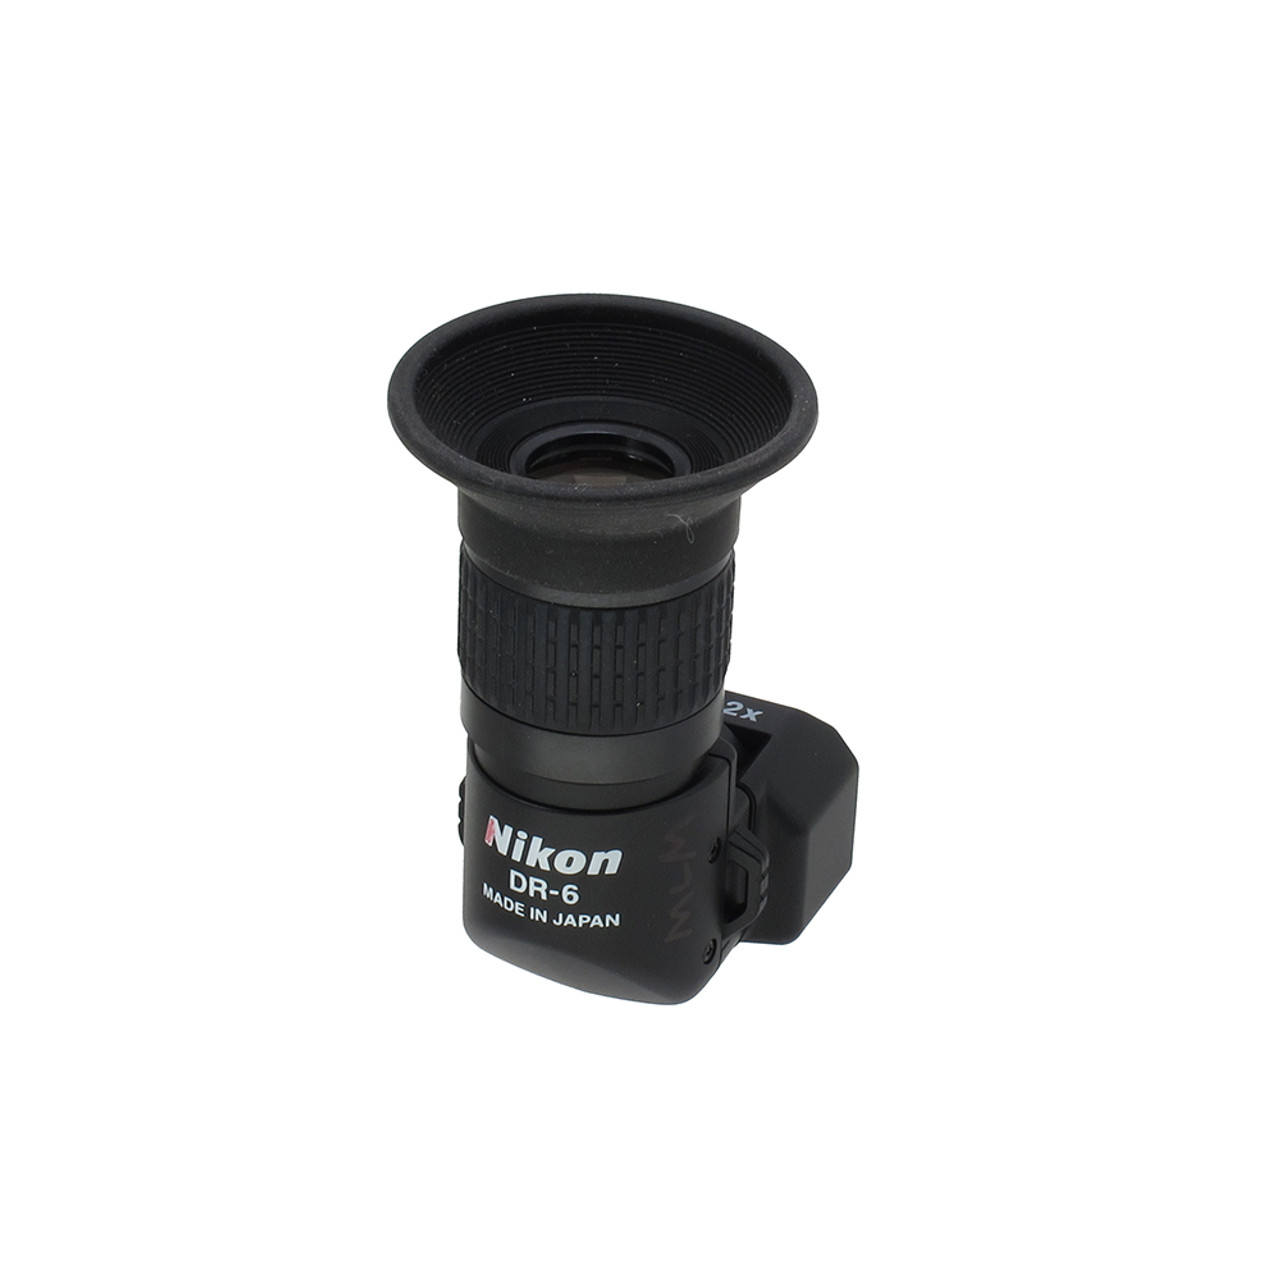 USED NIKON DR-6 RIGHT ANGLE FINDER